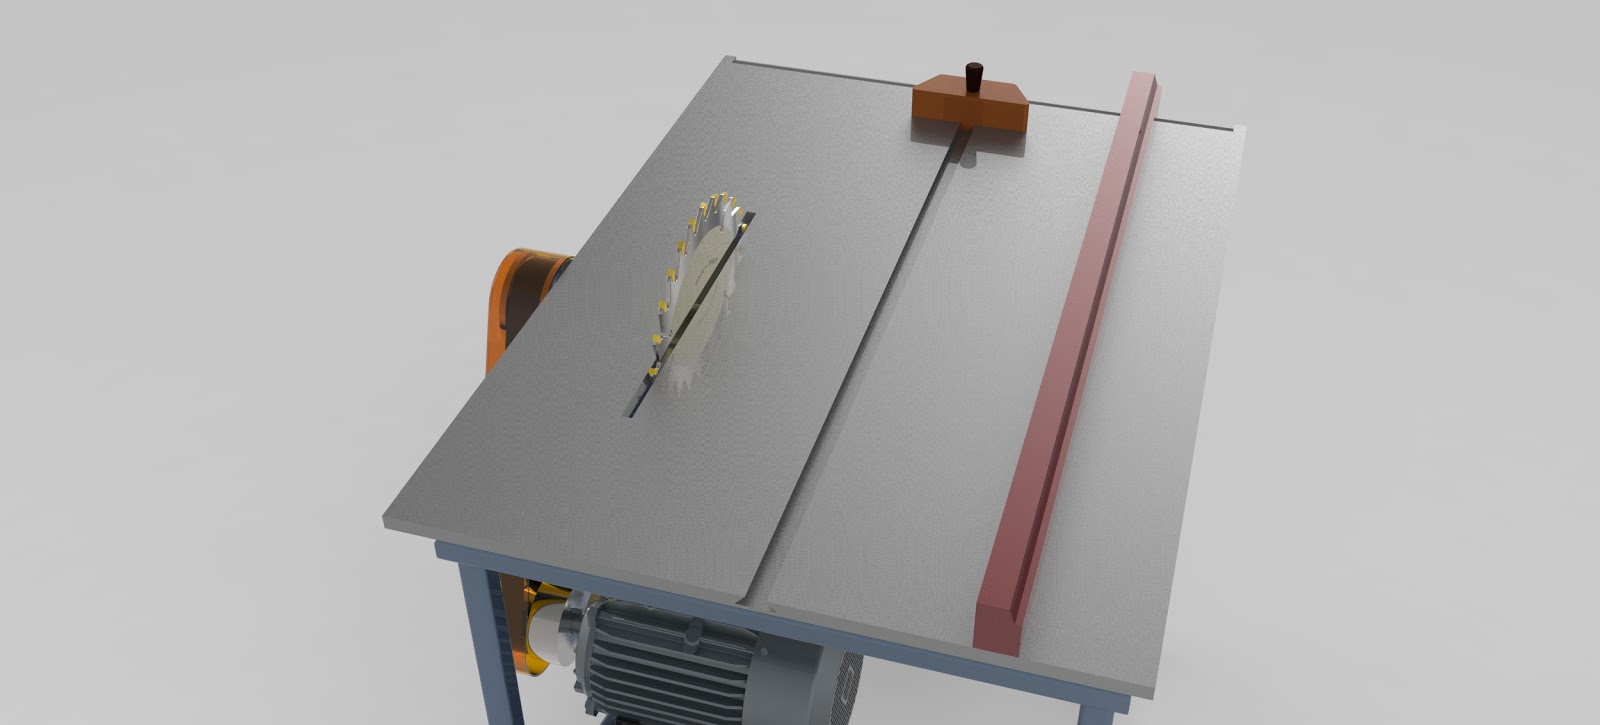 TABLE SAW PRO || Download free 3D cad models #100132